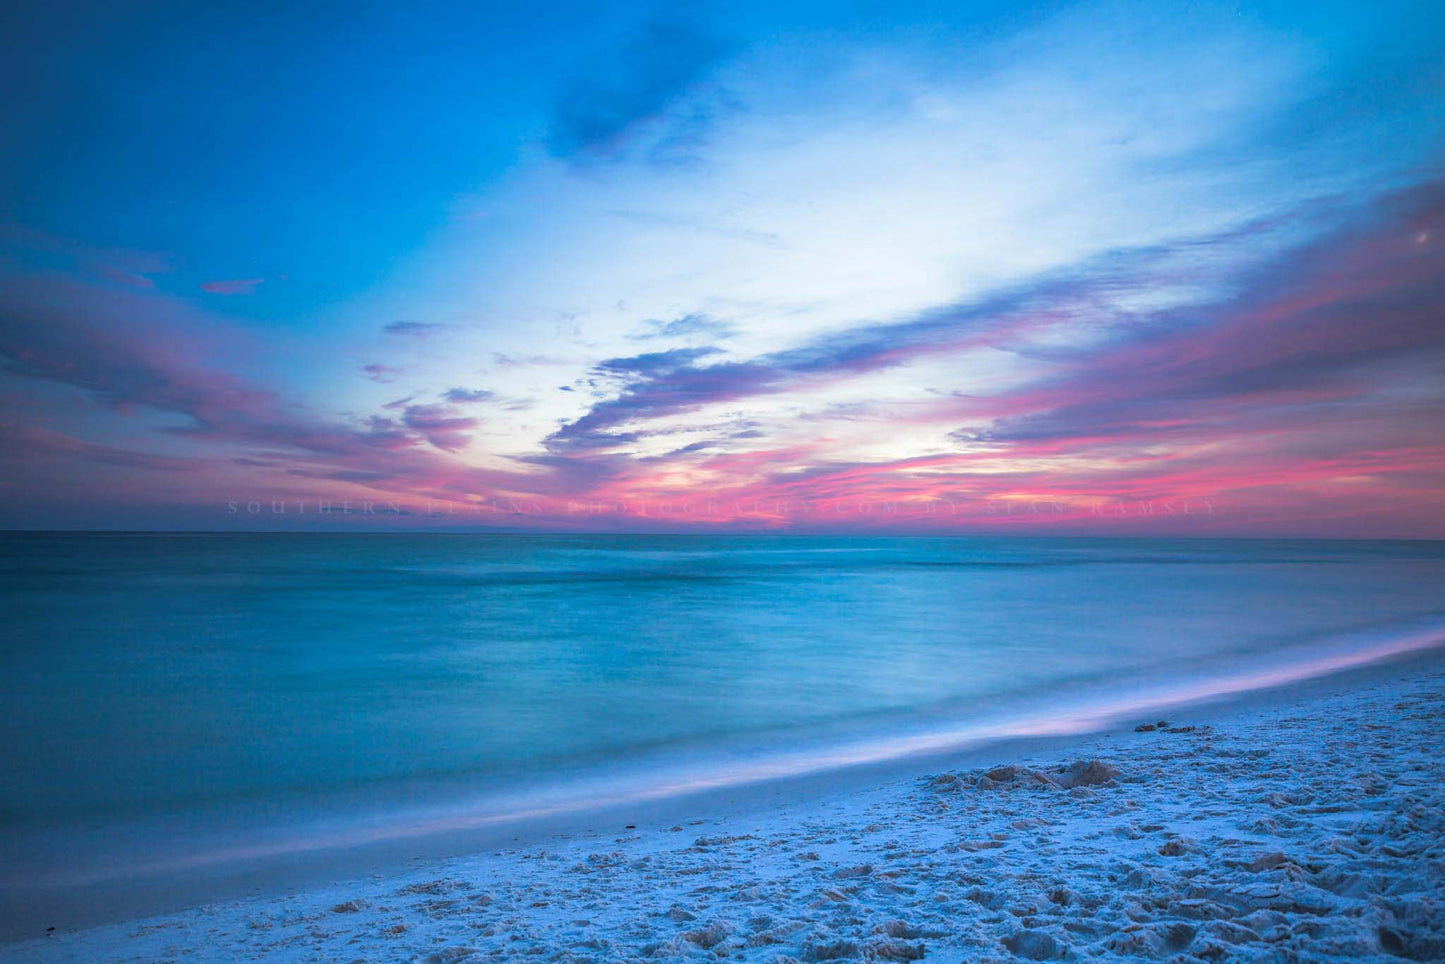 Seascape photography print of a scenic sunset over the Emerald Waters of the Gulf Coast along a beach near Destin, Florida by Sean Ramsey of Southern Plains Photography.